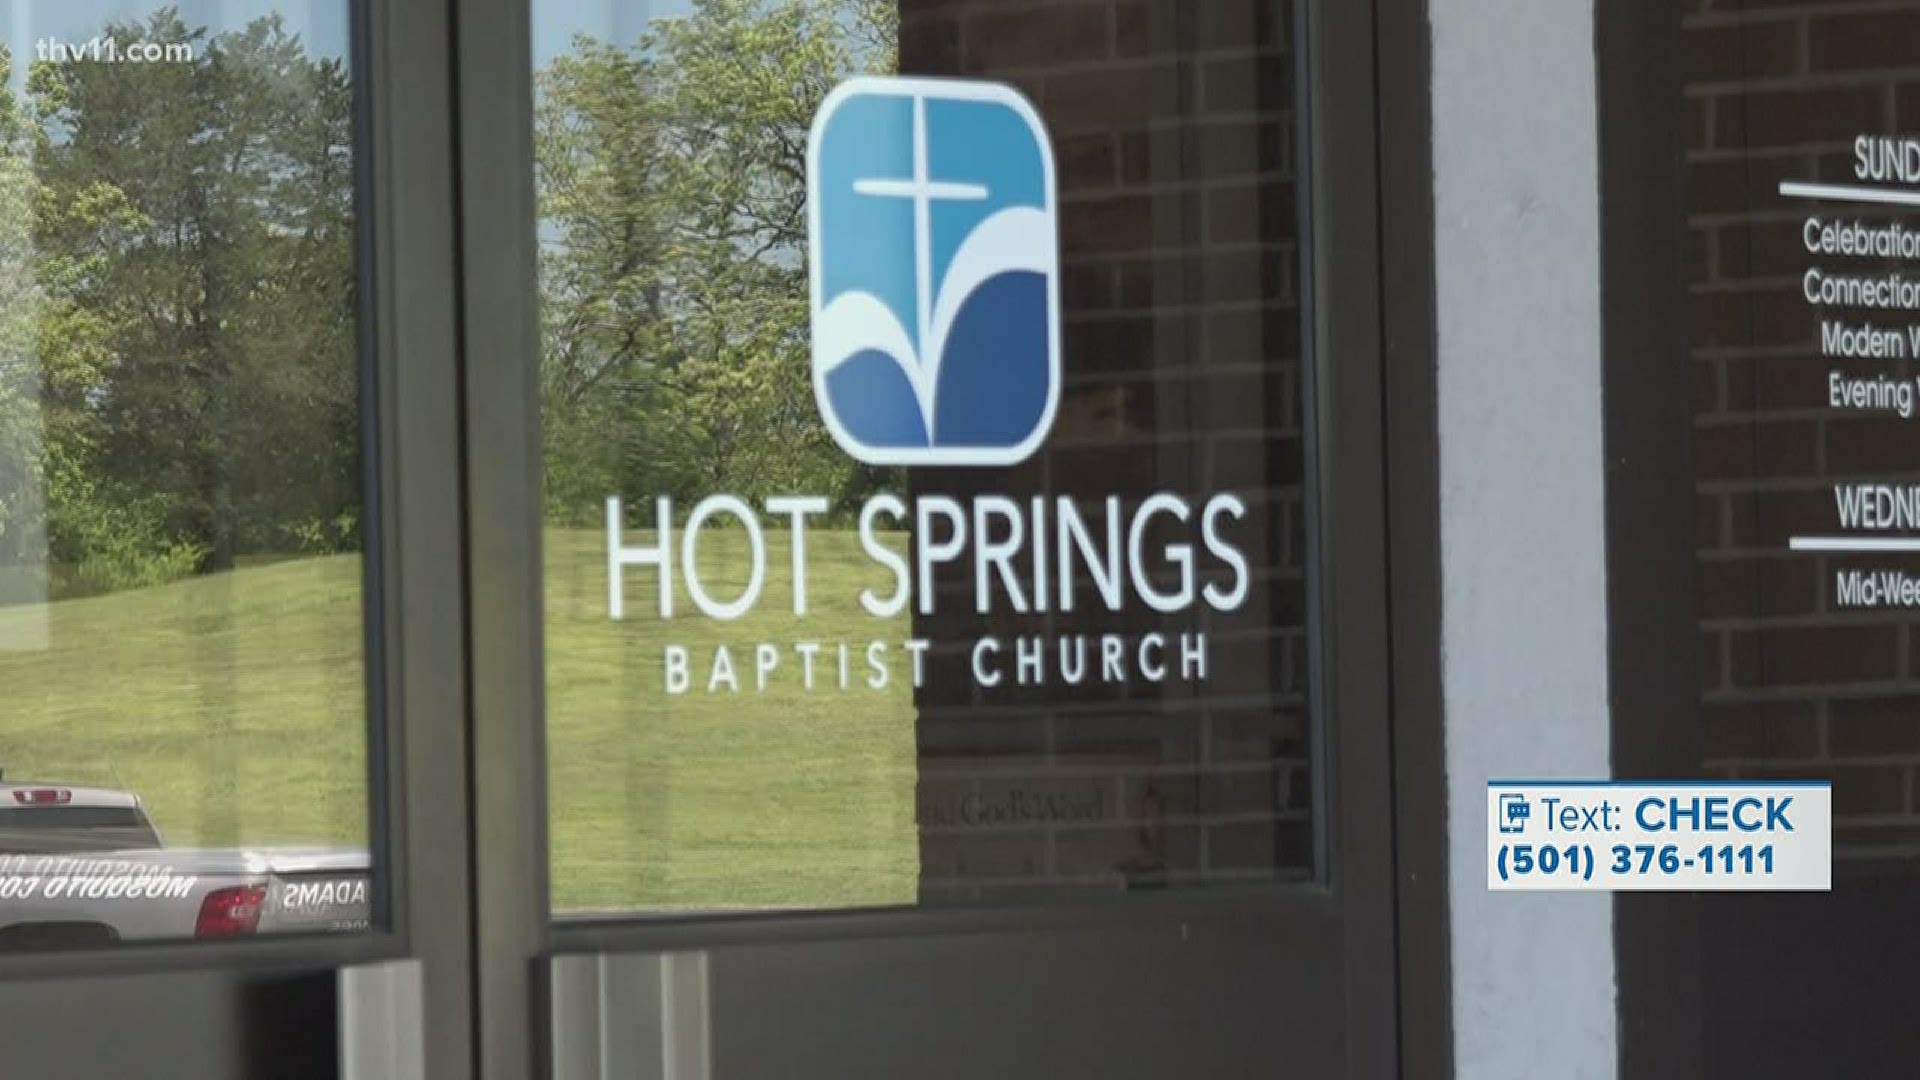 When a church in Greers Ferry turned into a Hot Spot, public health officials rushed to contain it. The same thing happened to a Hot Springs church, but differently.